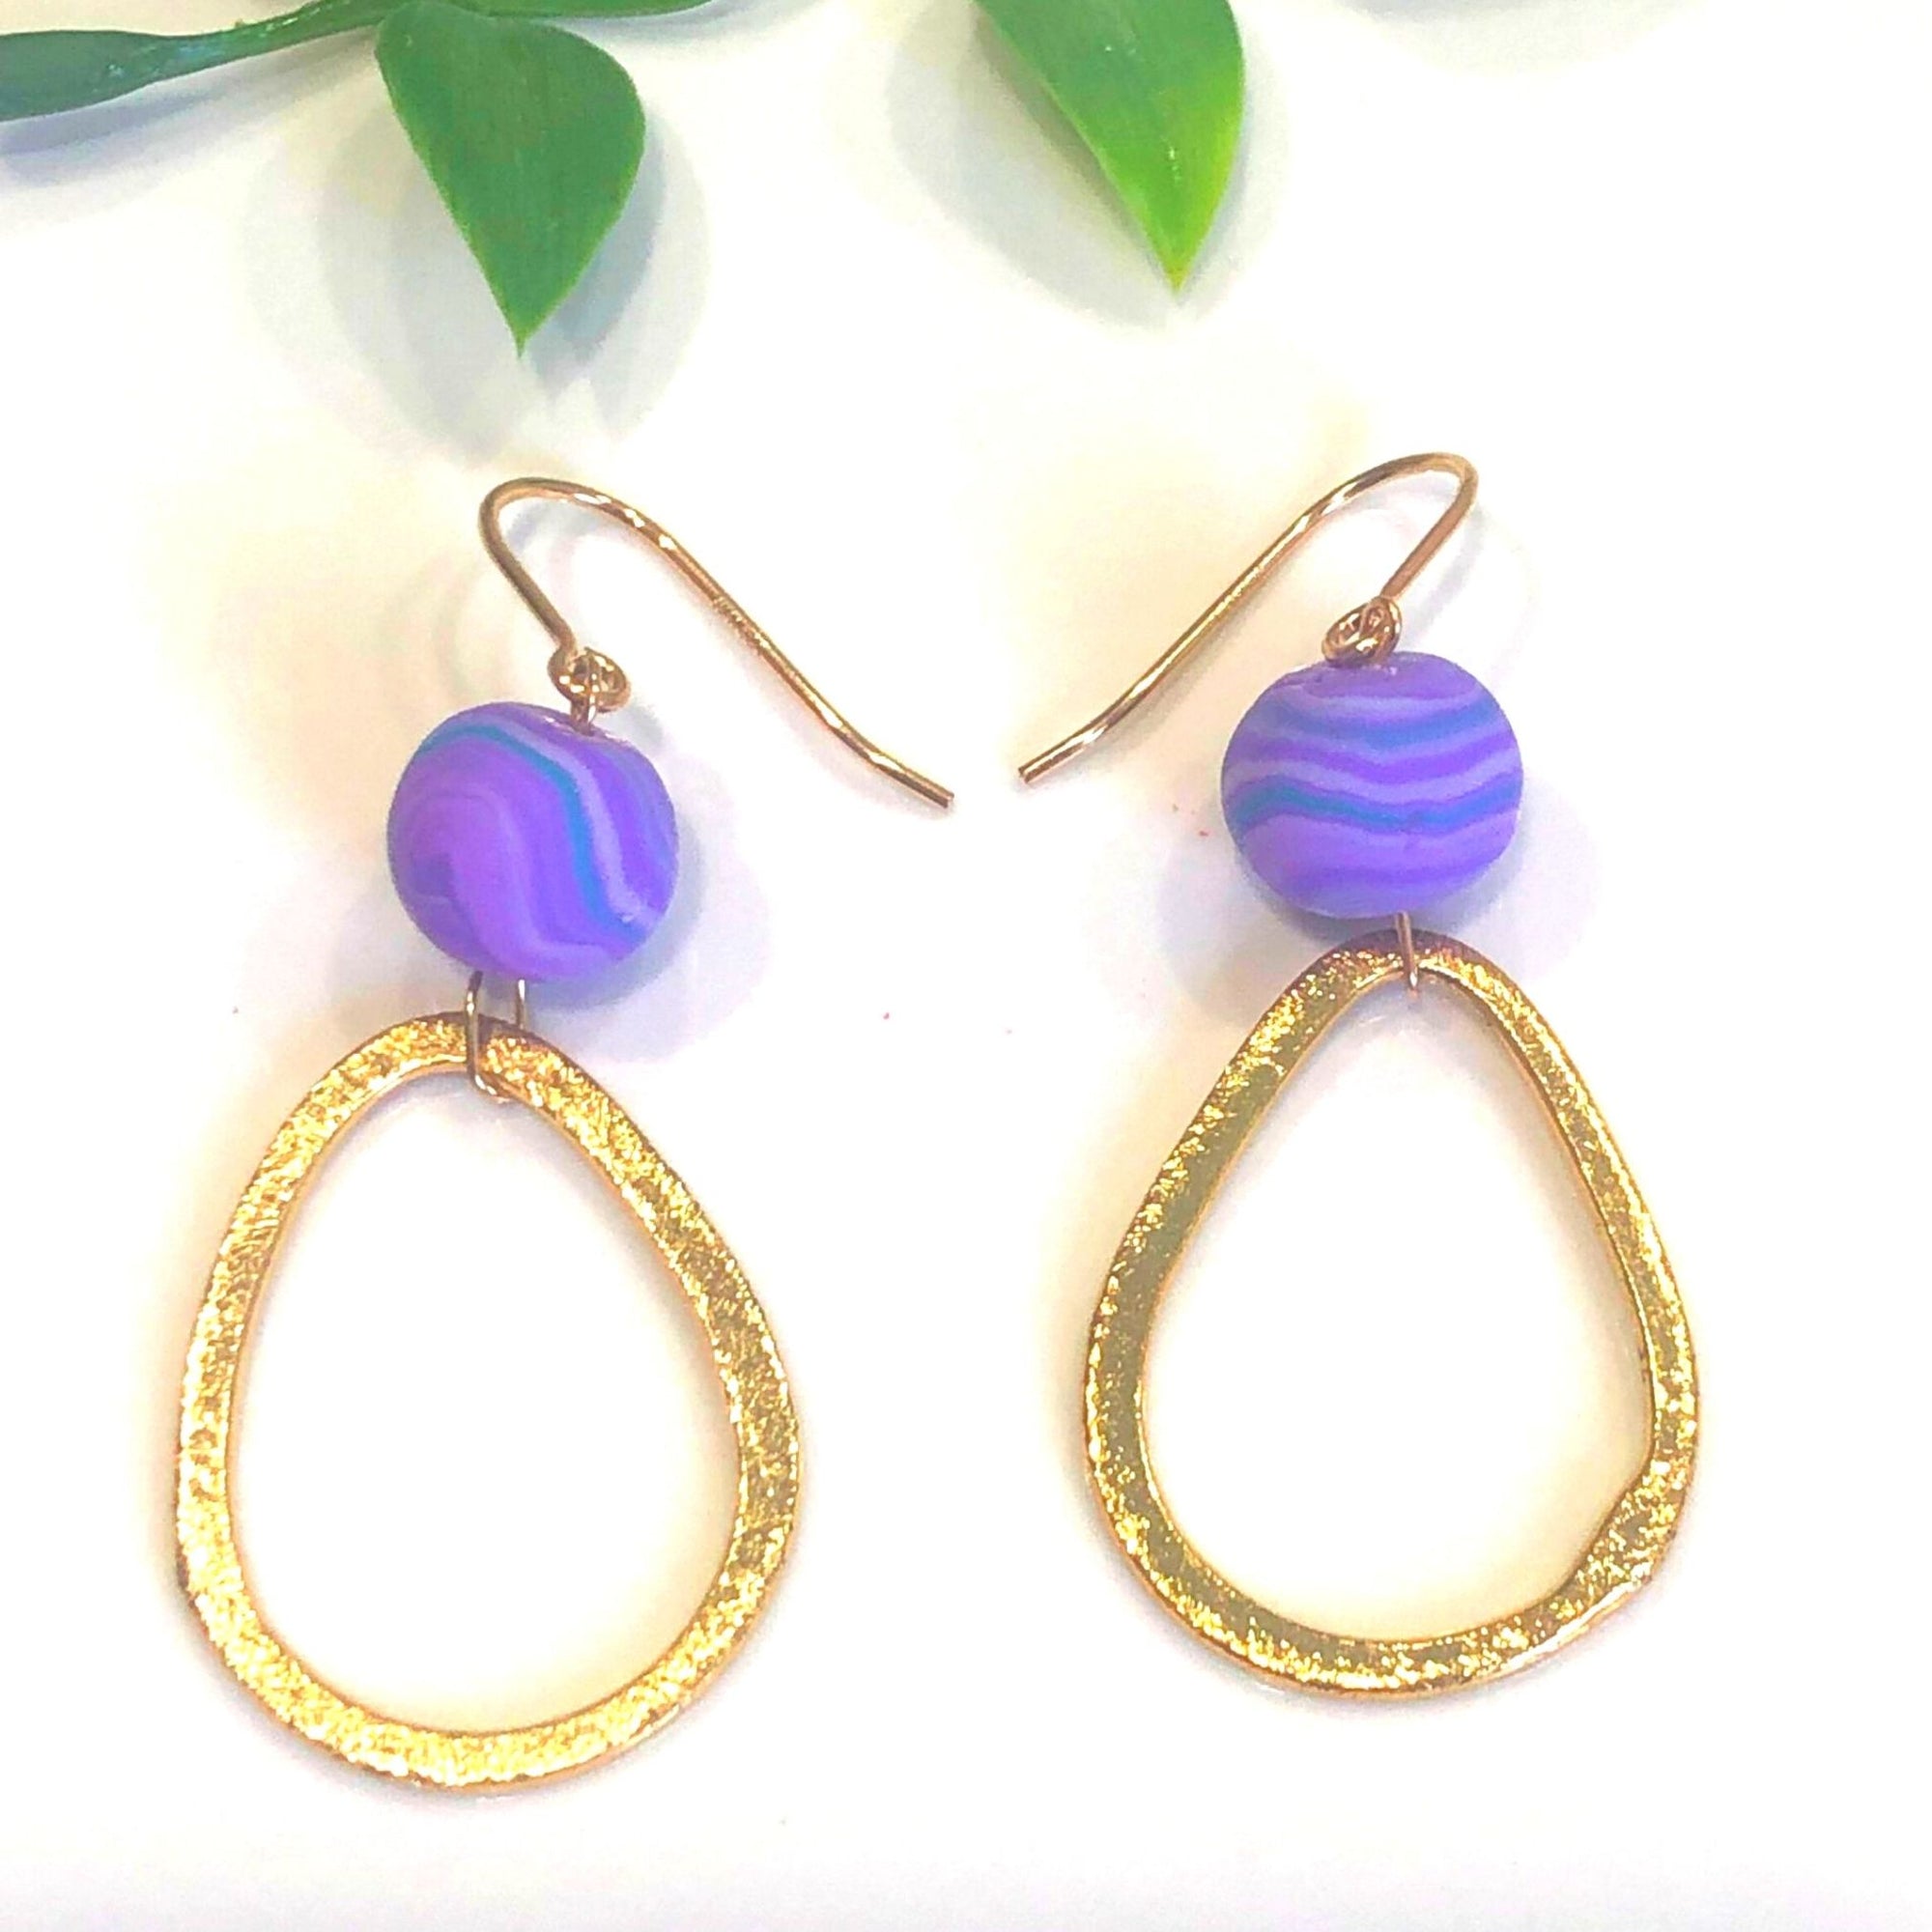 Handmade Earrings | Handcrafted Beads Purple Mauve and Blue | 14kt Gold Filled Hoops  ERDPP100